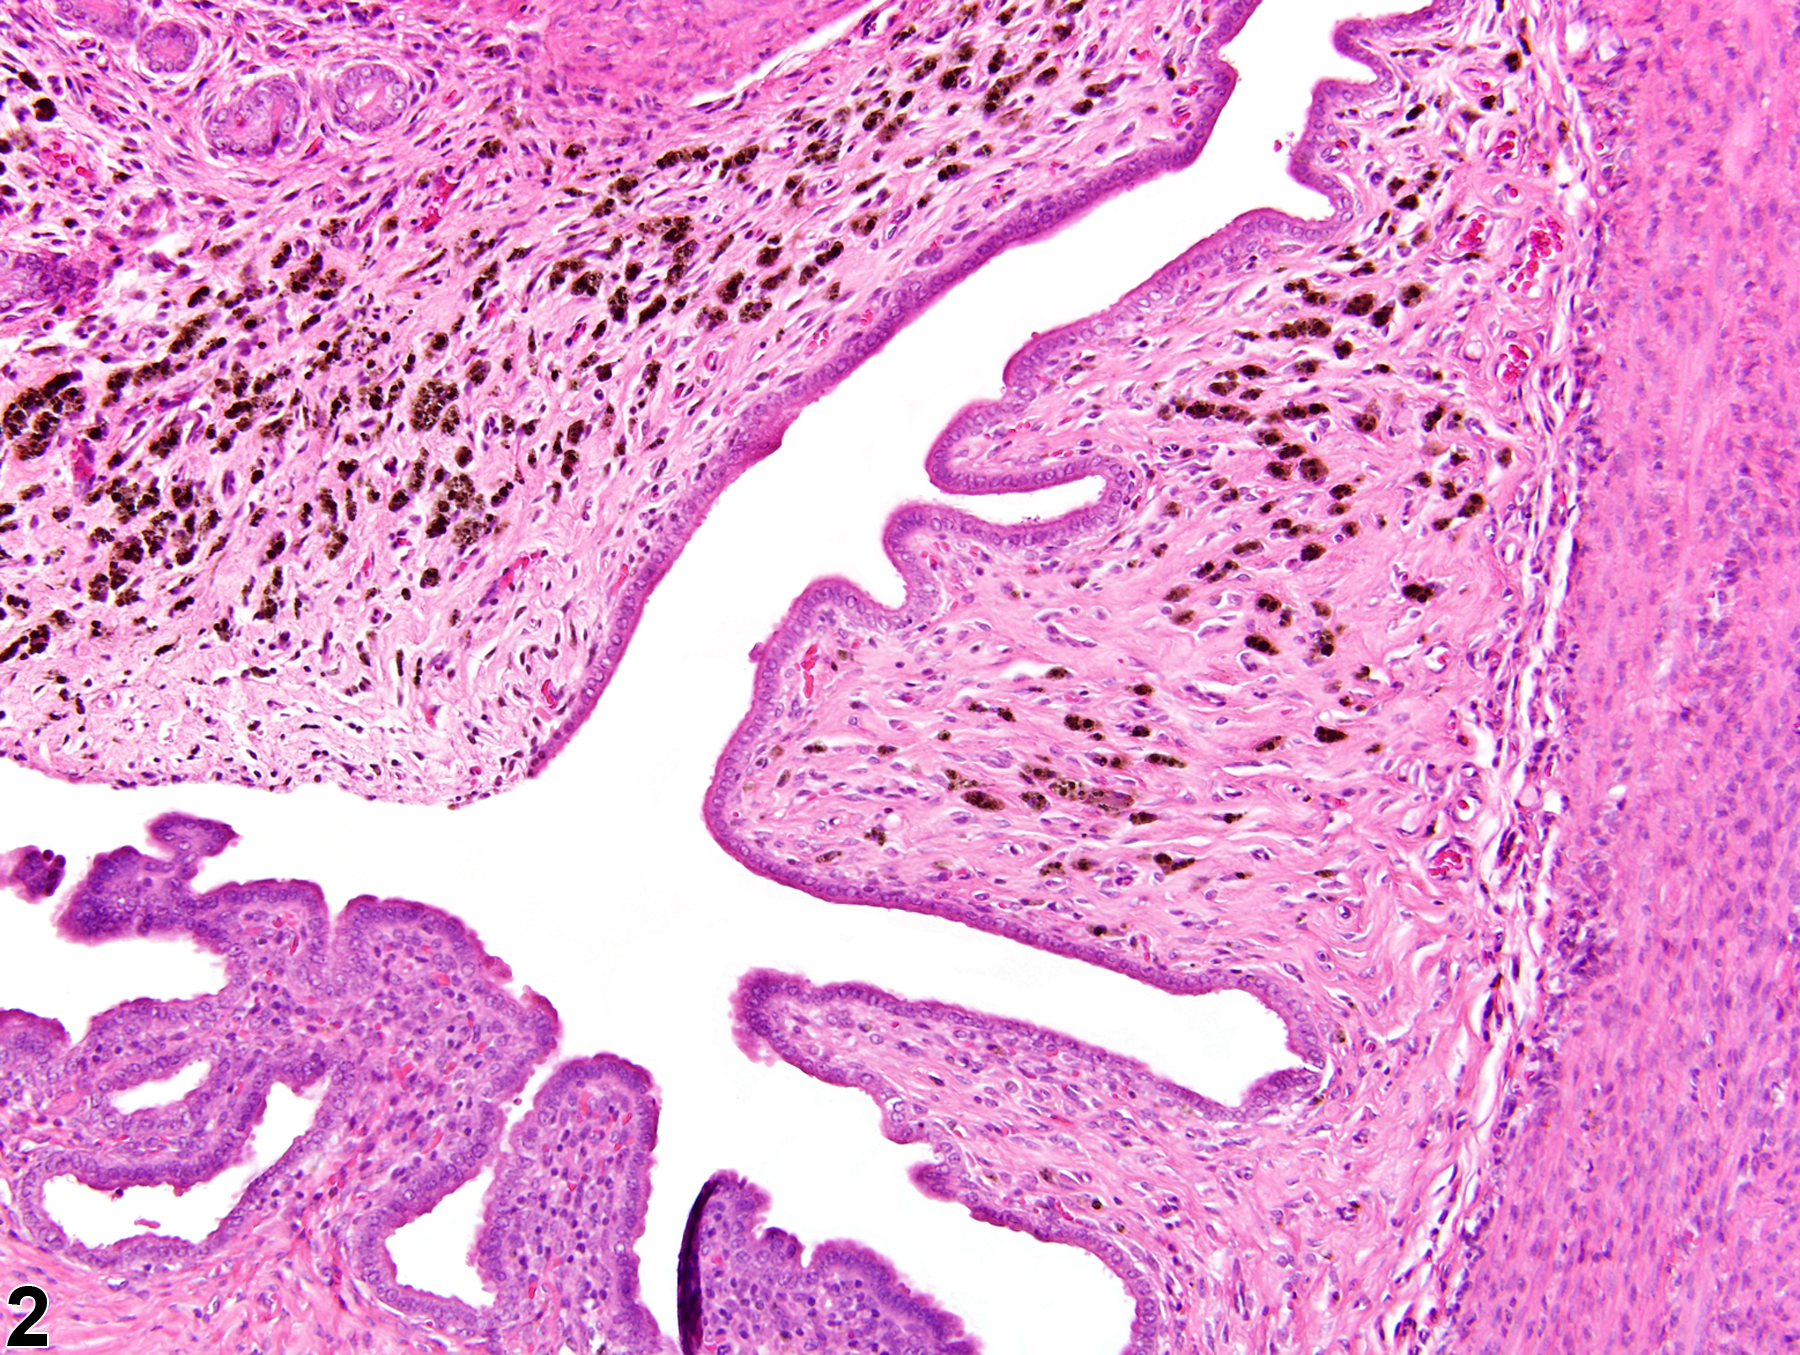 Image of pigment in the uterus from a female F344/N rat in a chronic study